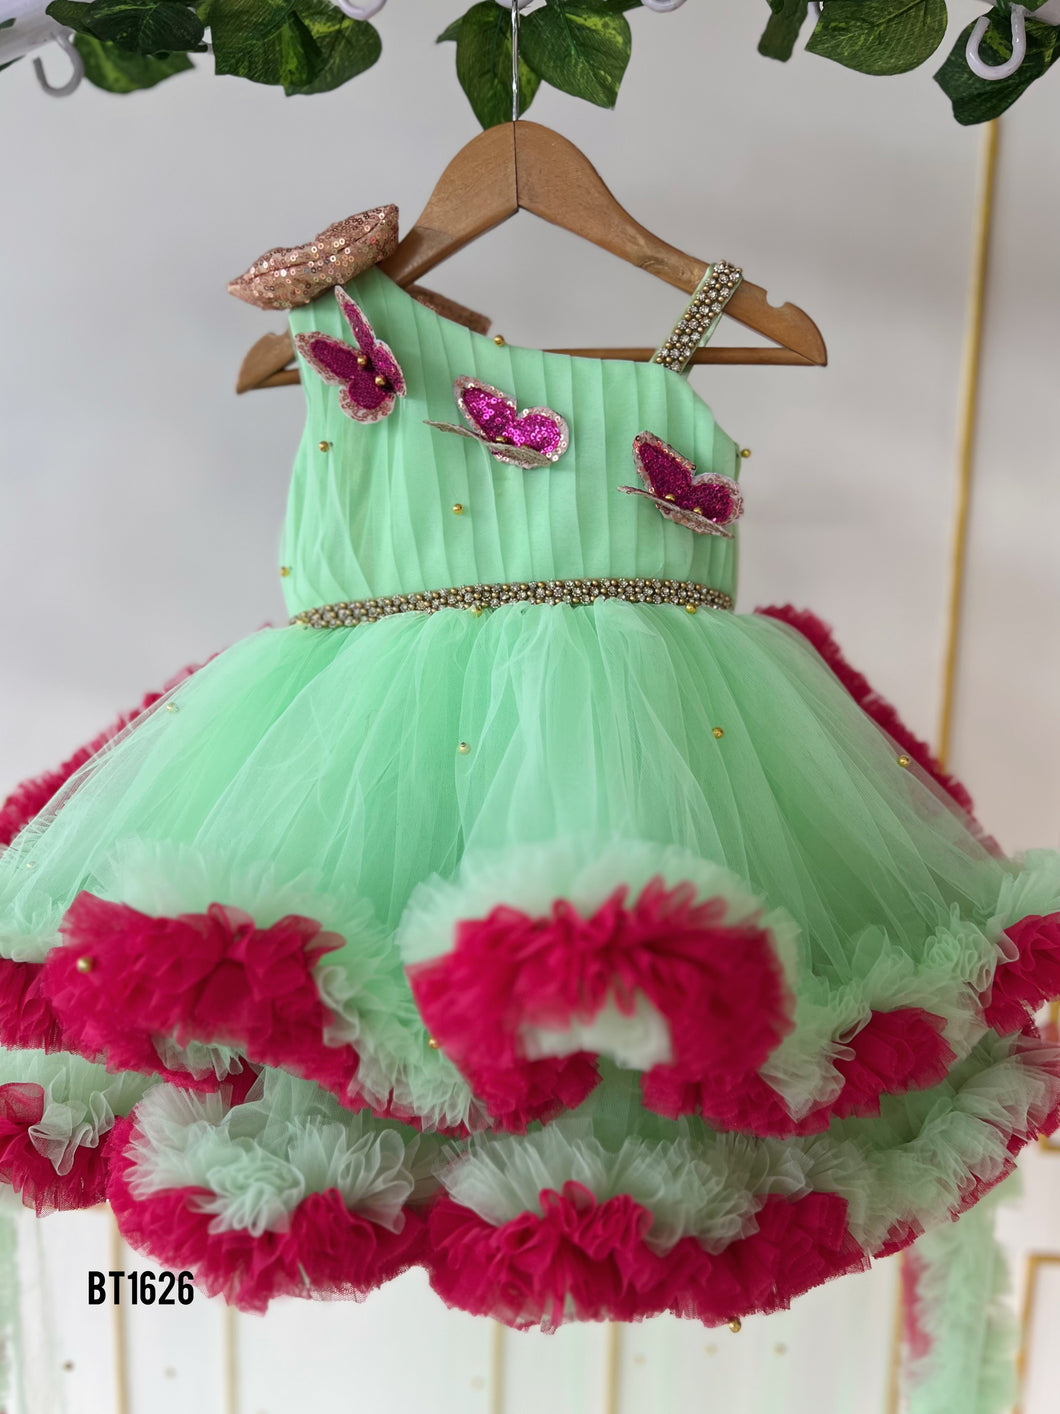 BT1626 Enchanted Blossom: A Whimsical Dress for Your Little Flower